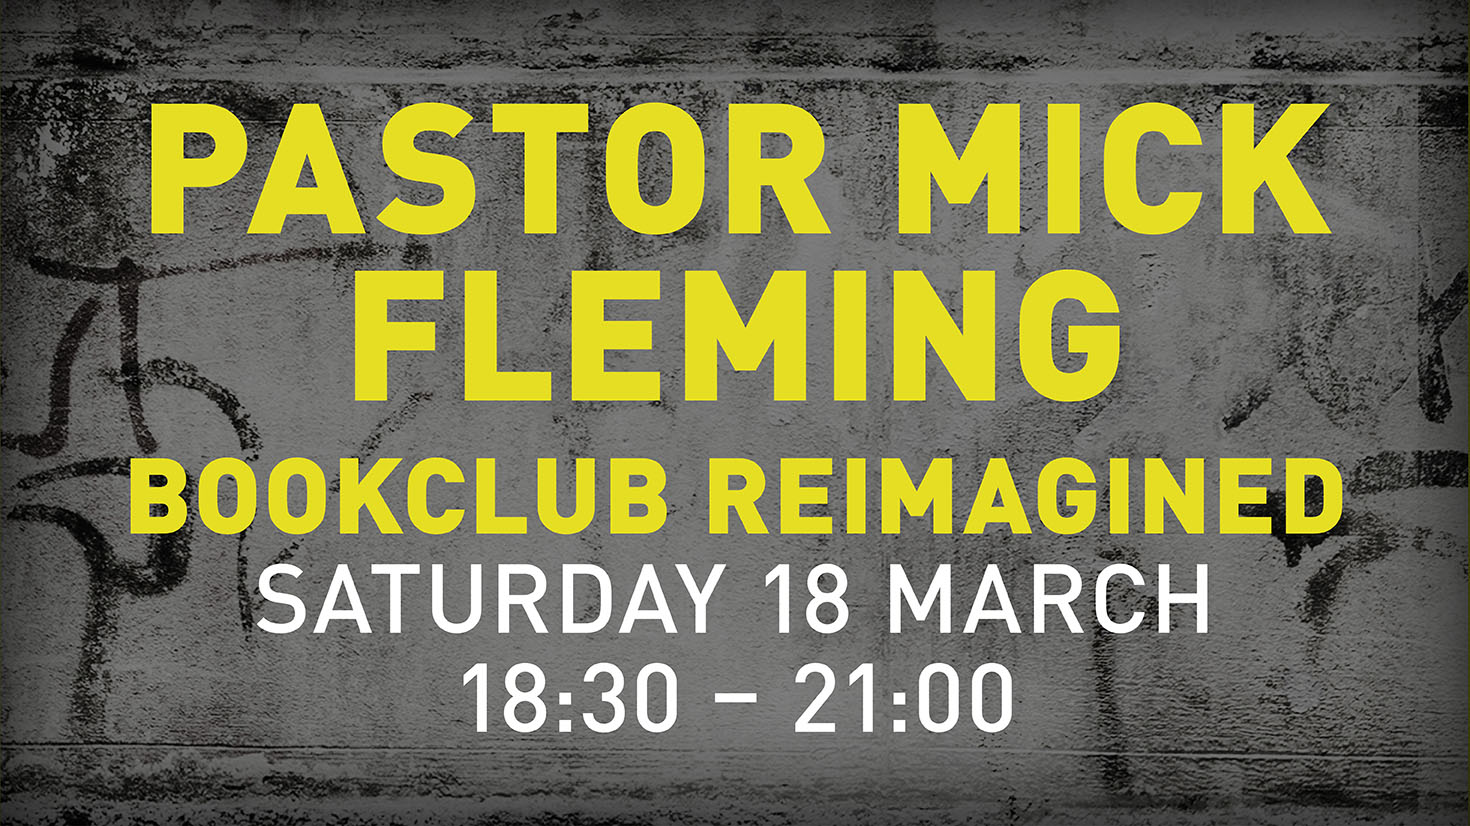 An Evening With Pastor Mick Fleming